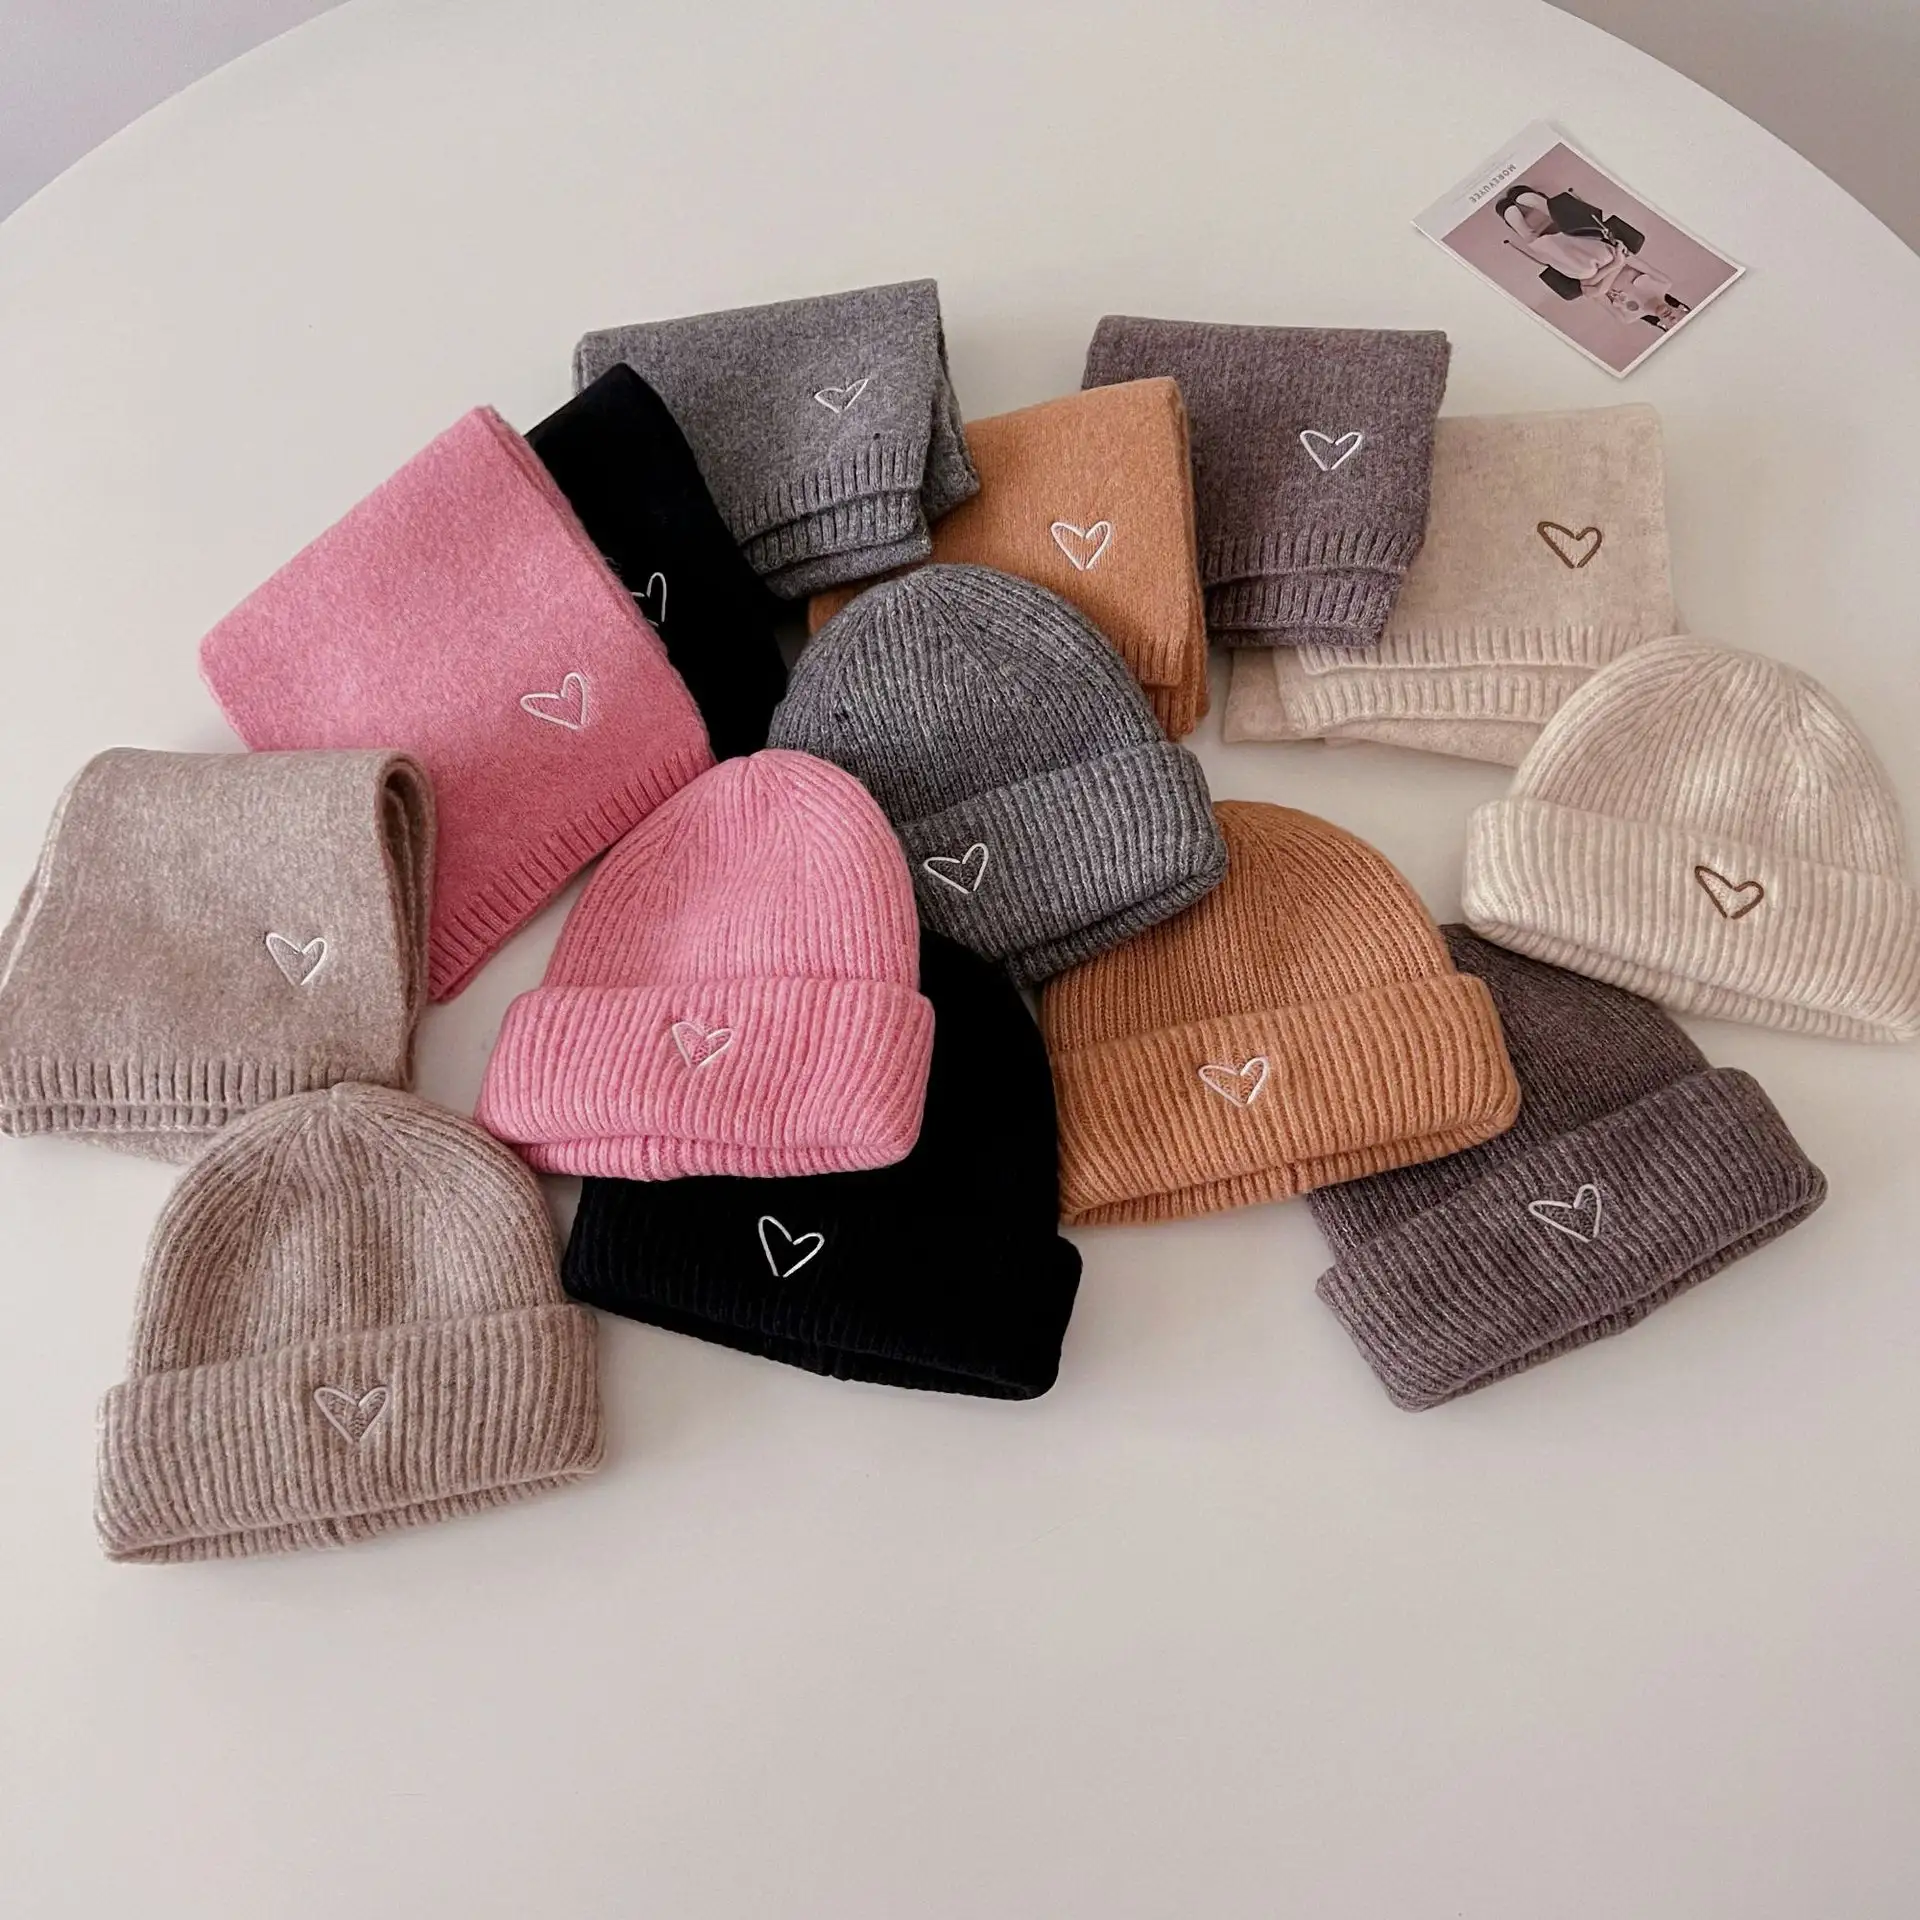 ins Children's hat Autumn/Winter baby ear protection hat Korean simple girl's knitted super soft baby wool hat scarf set